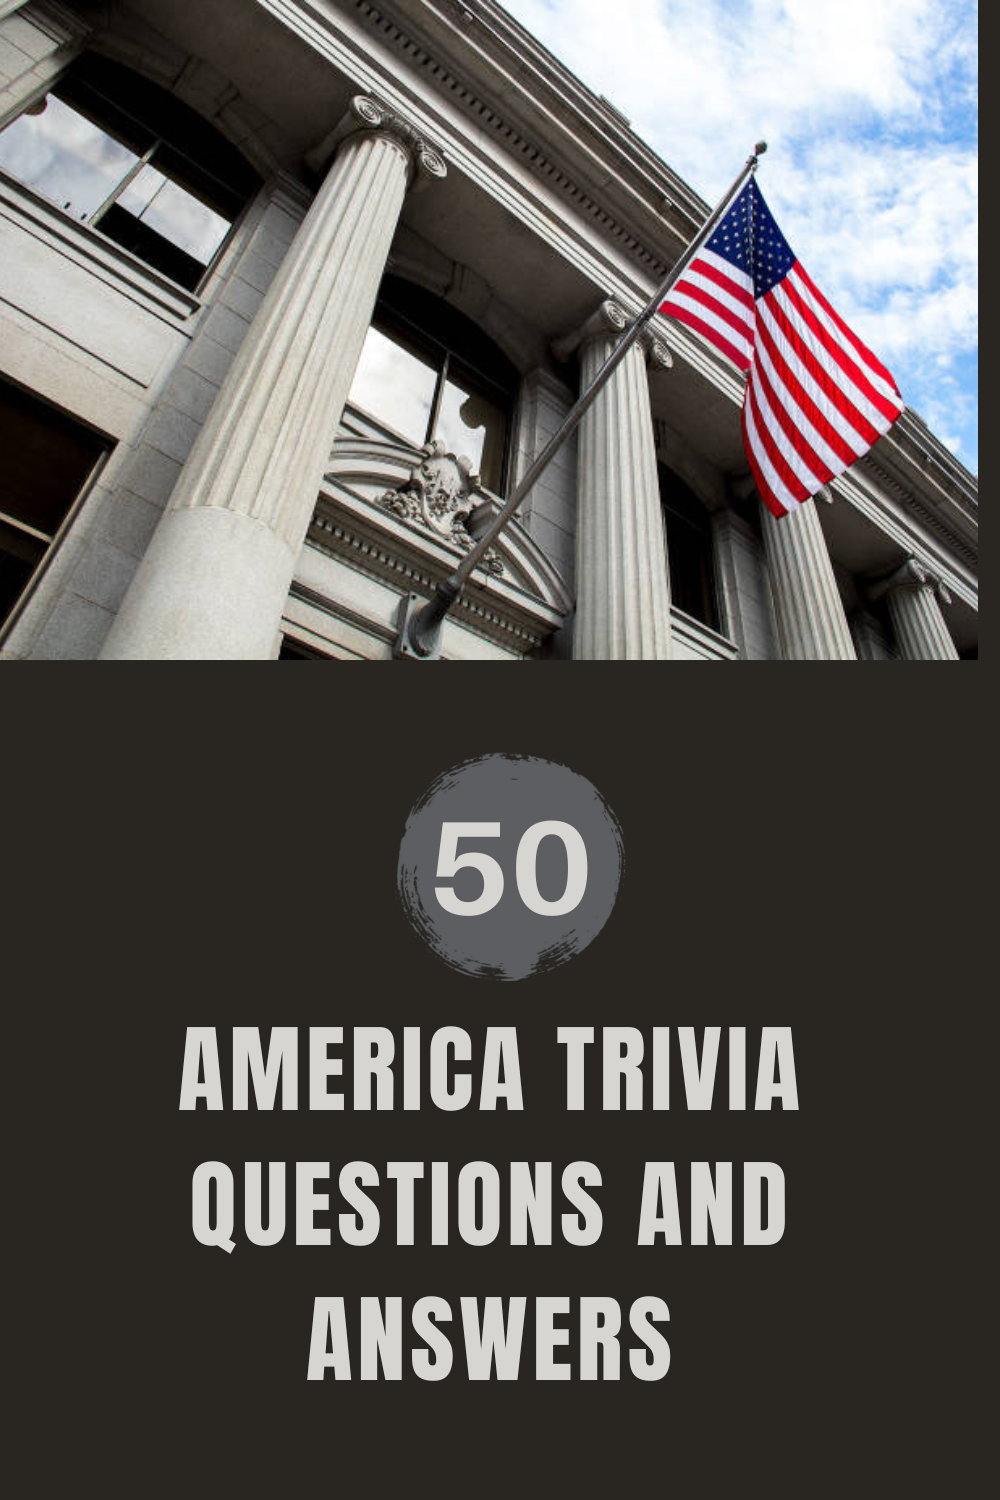 50 America Trivia Questions and Answers